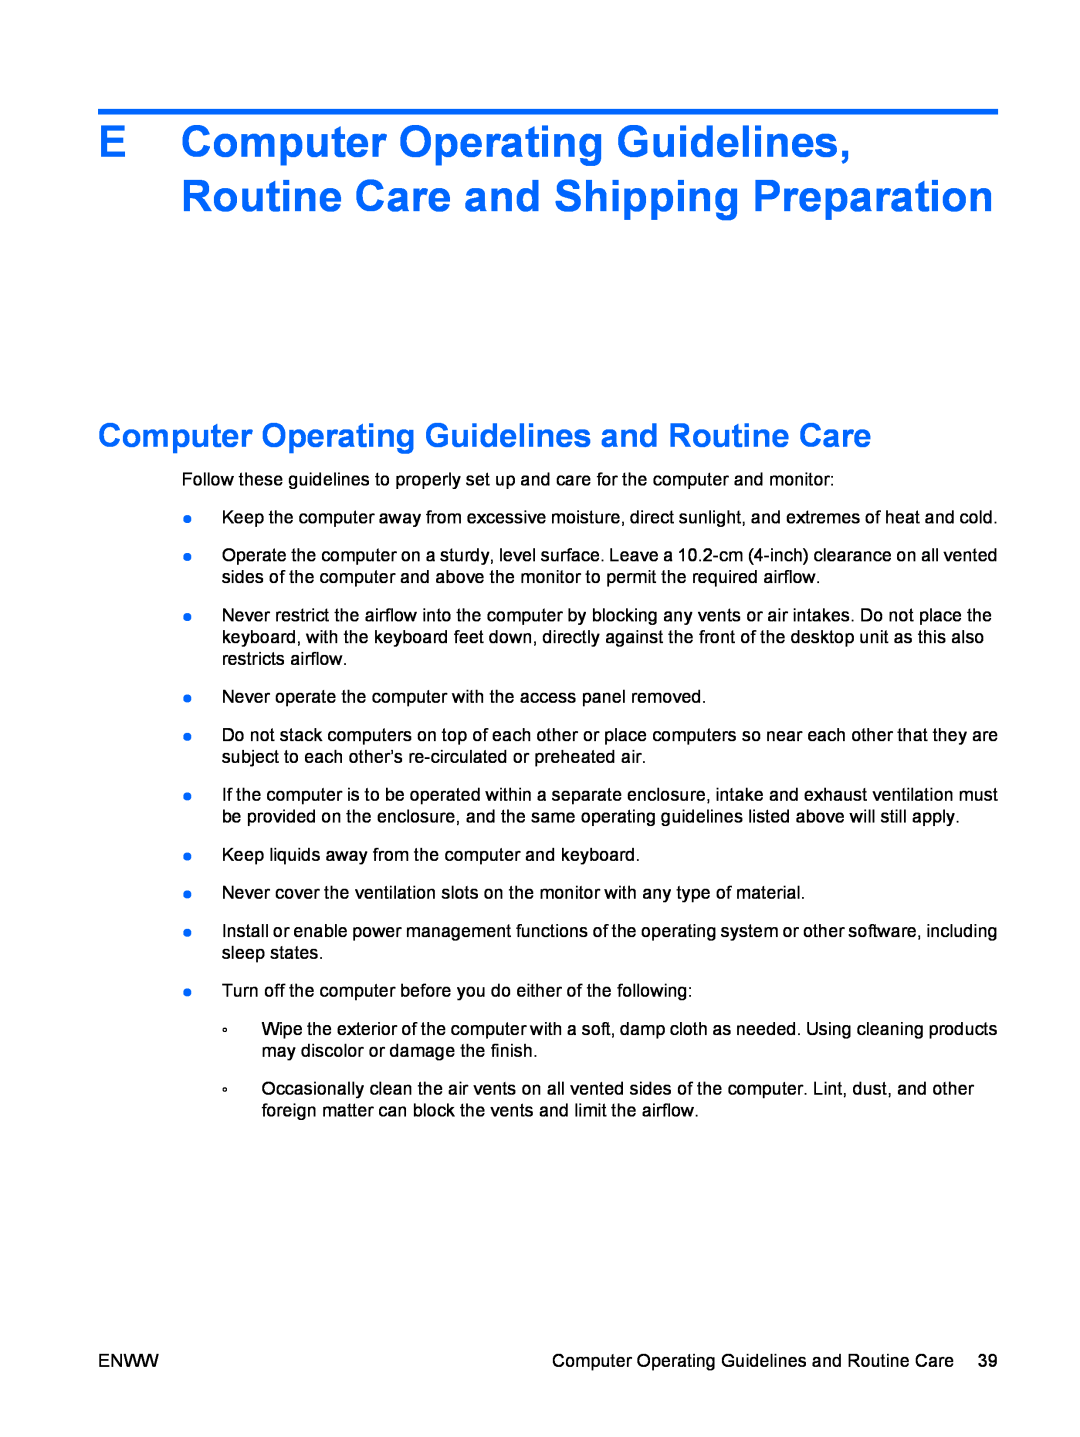 Hitachi 8000 manual Computer Operating Guidelines and Routine Care 